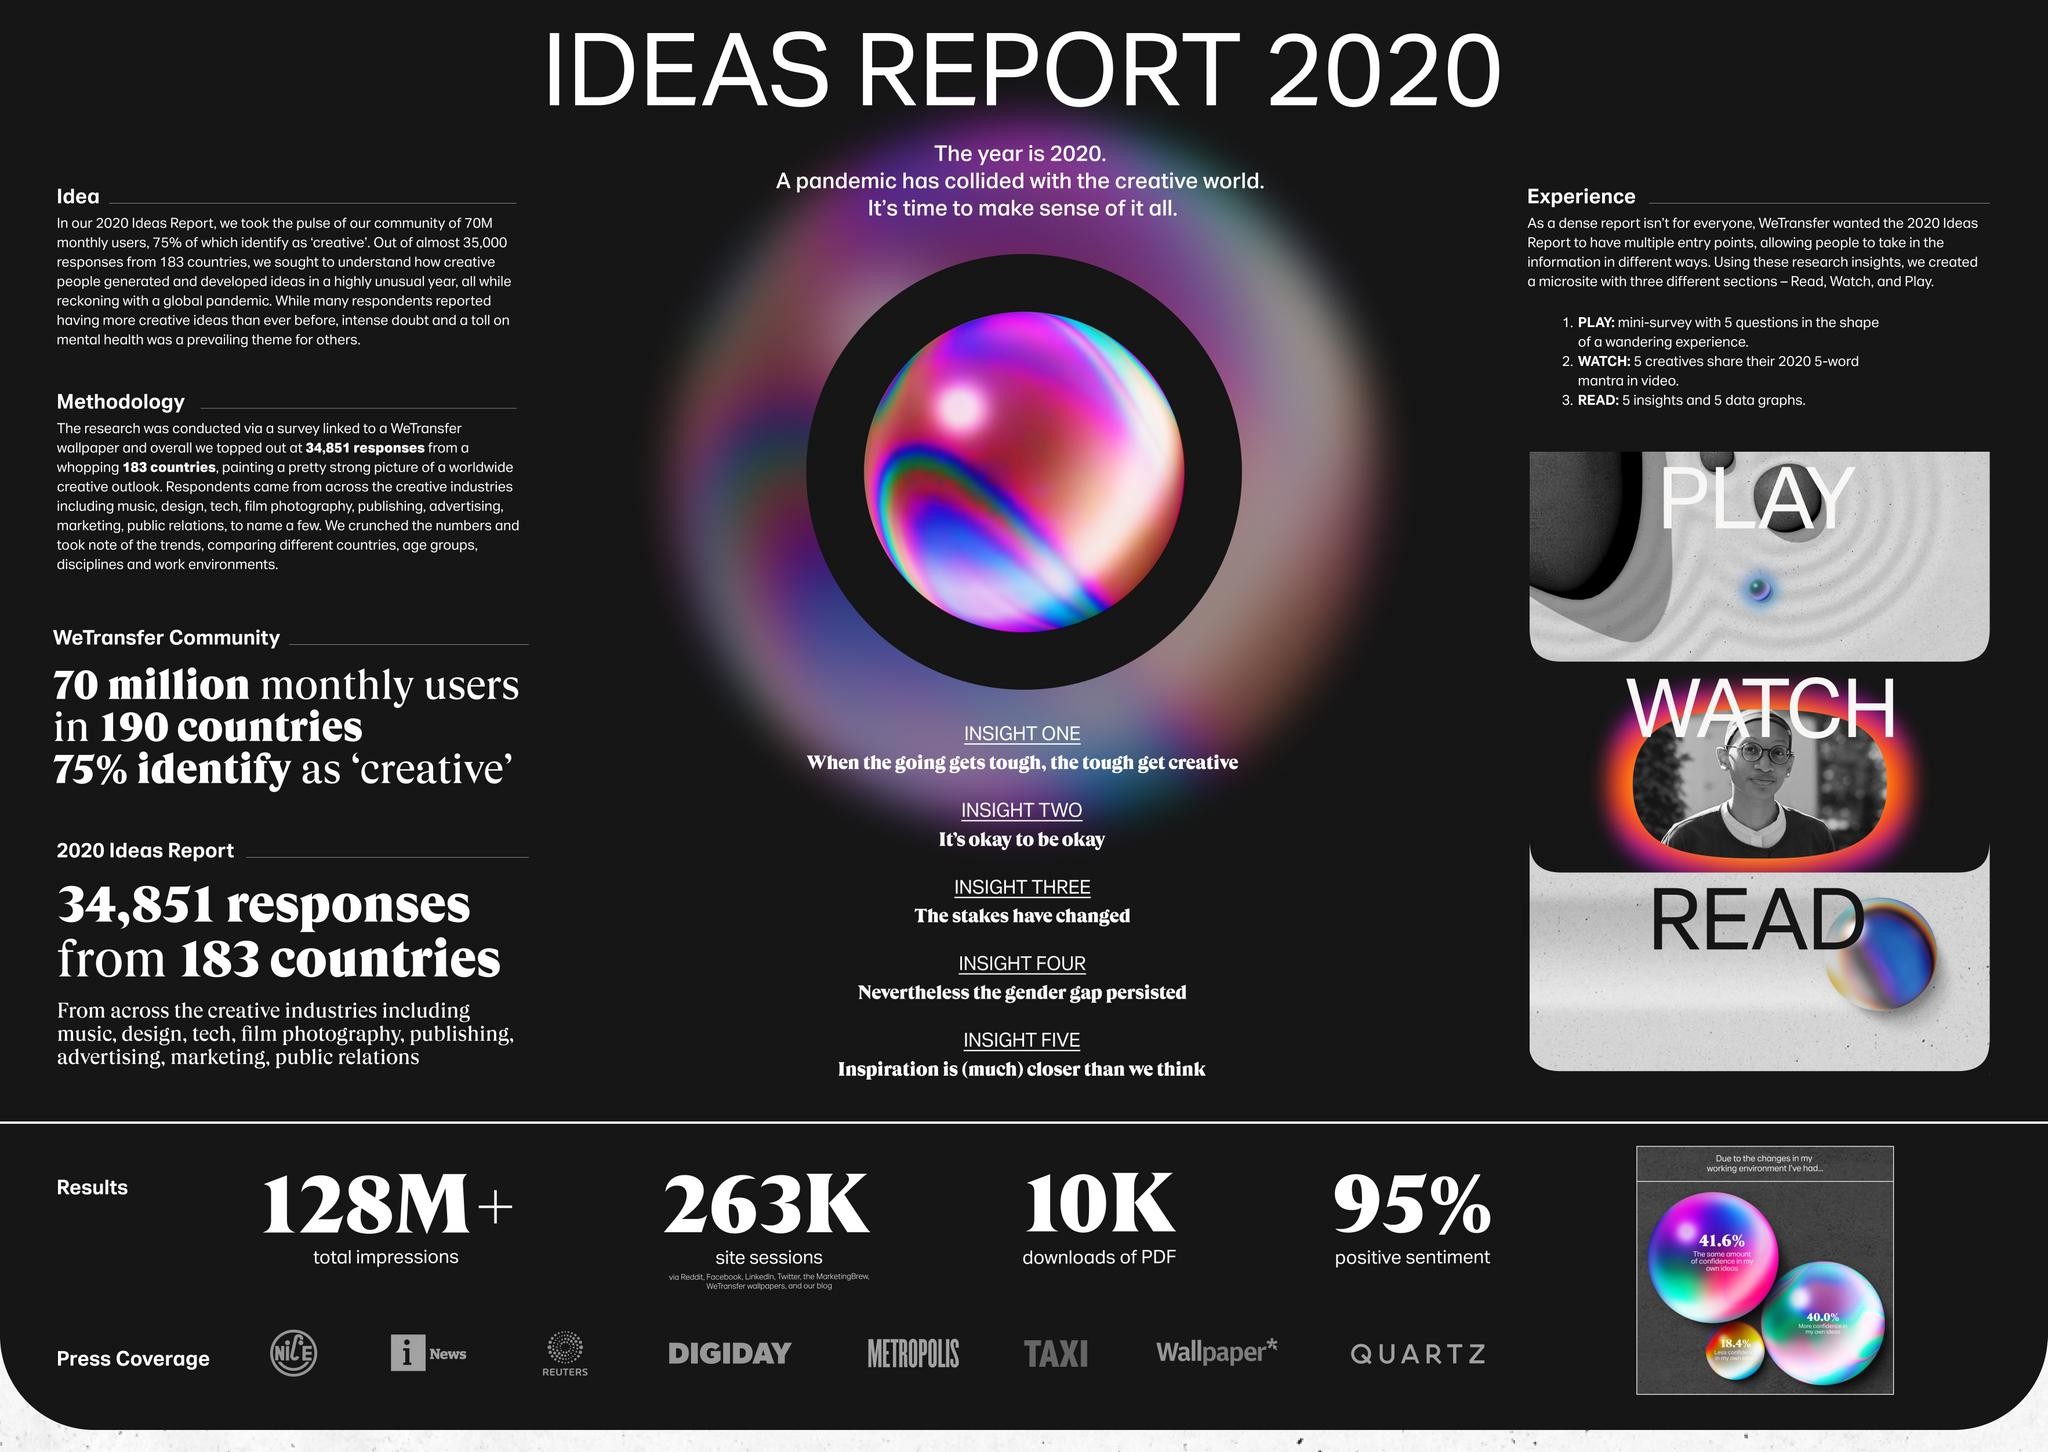 THE IDEAS REPORT 2020